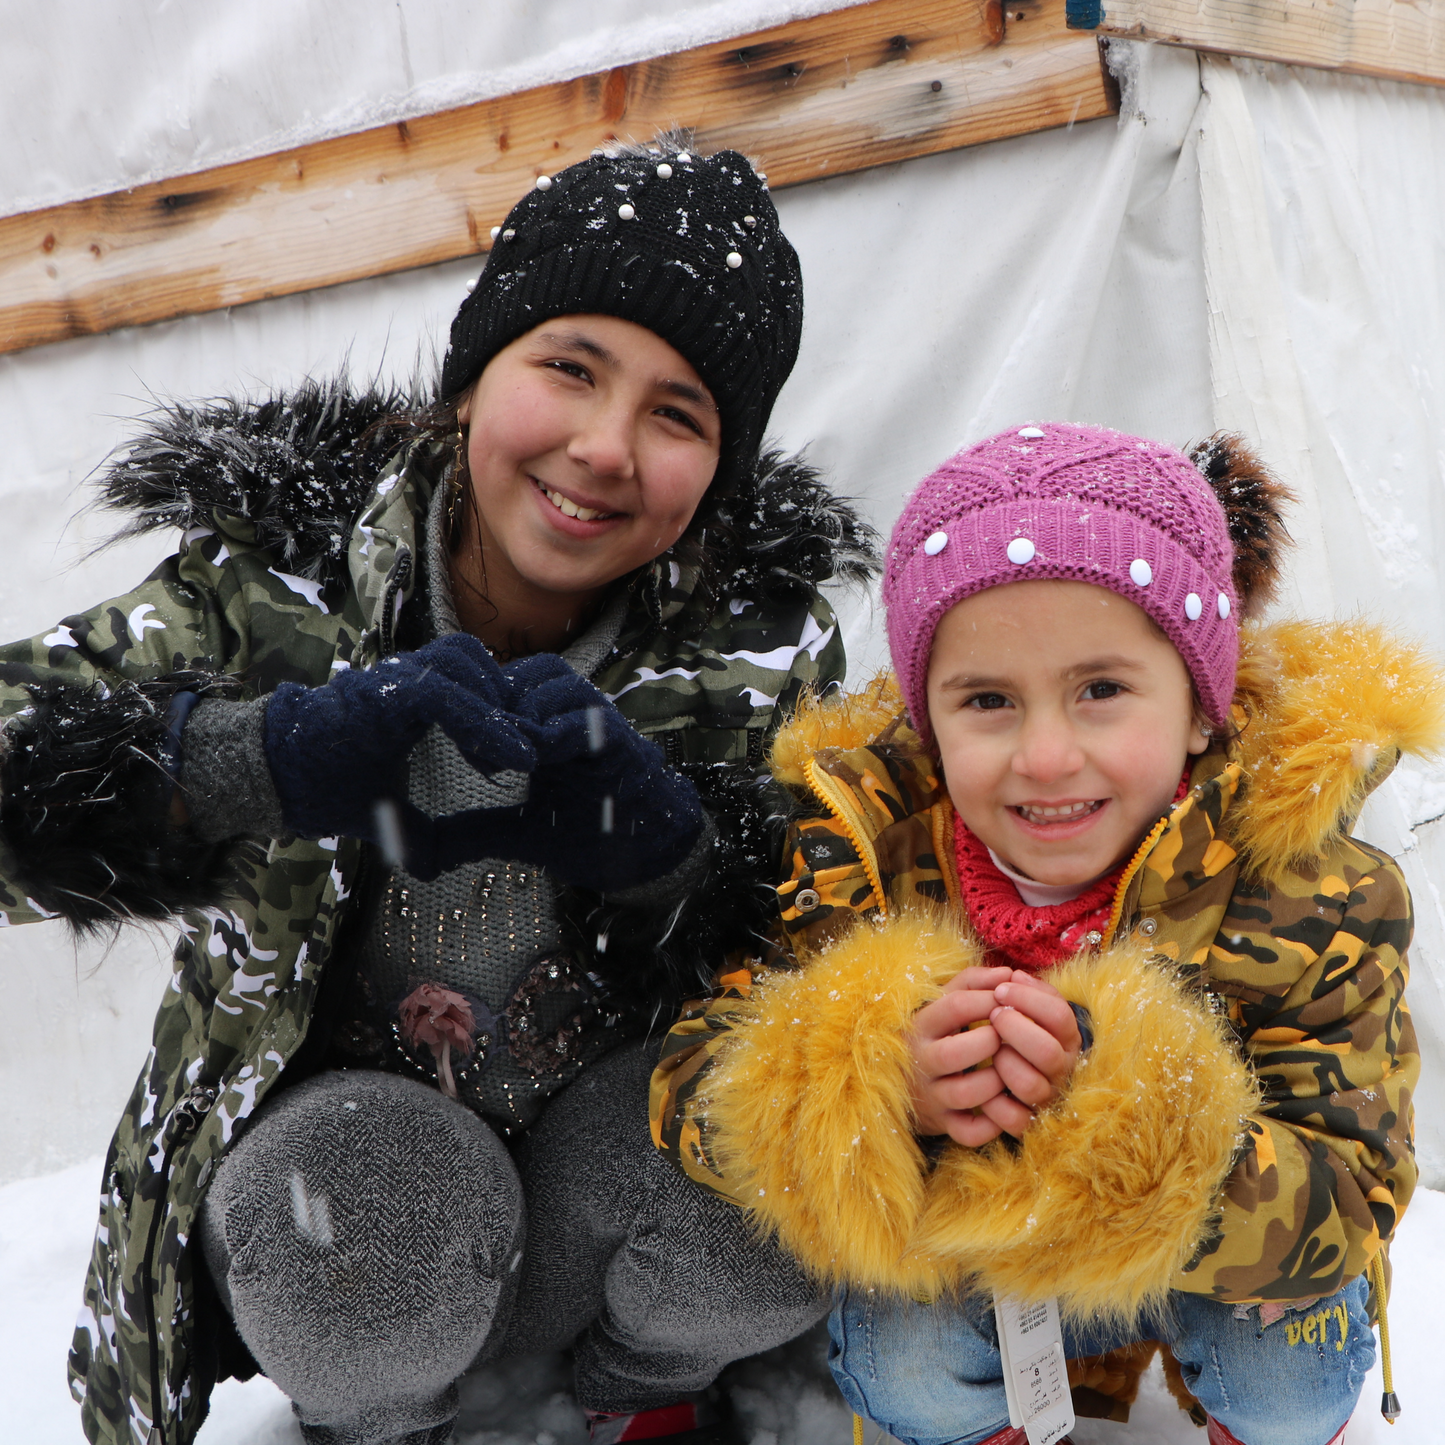 This image has 2 young refugee girls dressed for winter with their hoodies on, smiling and symbolising hearts wirth their hands placed across their chest. They are both wearing winter hats and are in front of makeshift accomodation with plastic wrap on it.